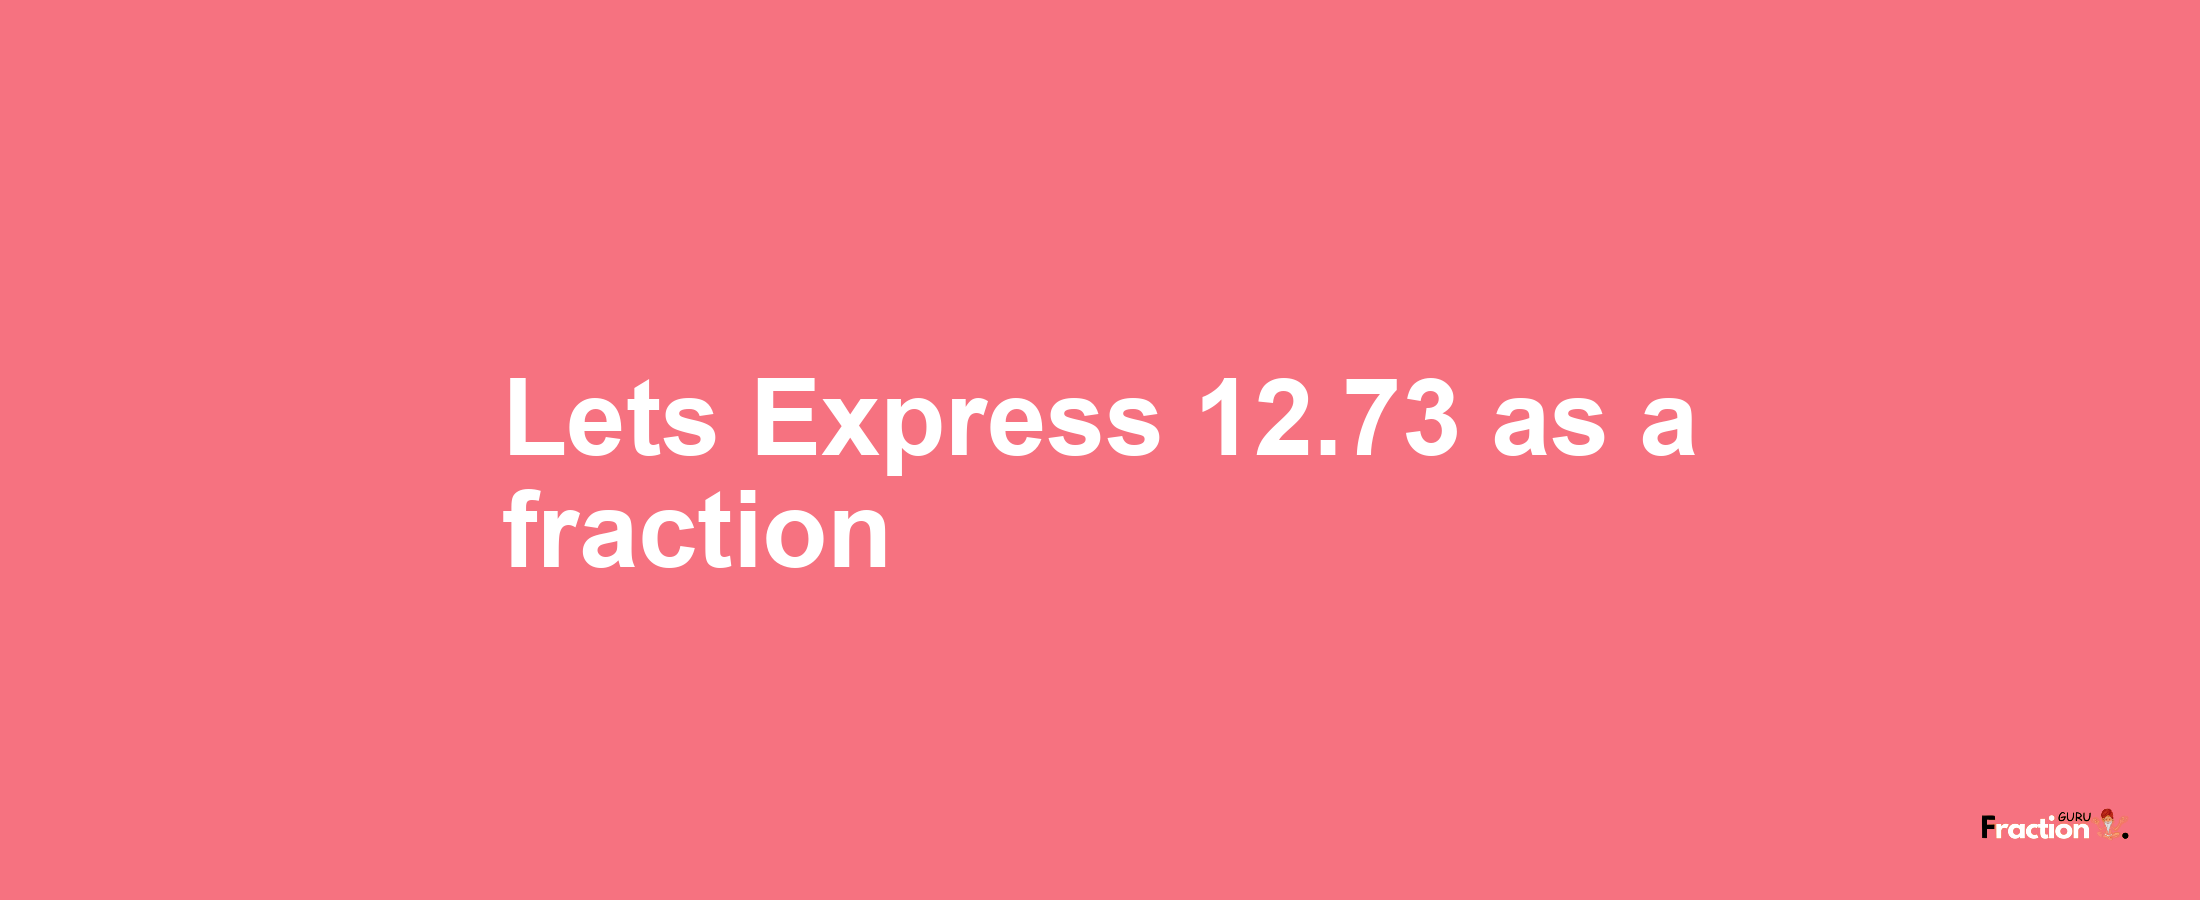 Lets Express 12.73 as afraction